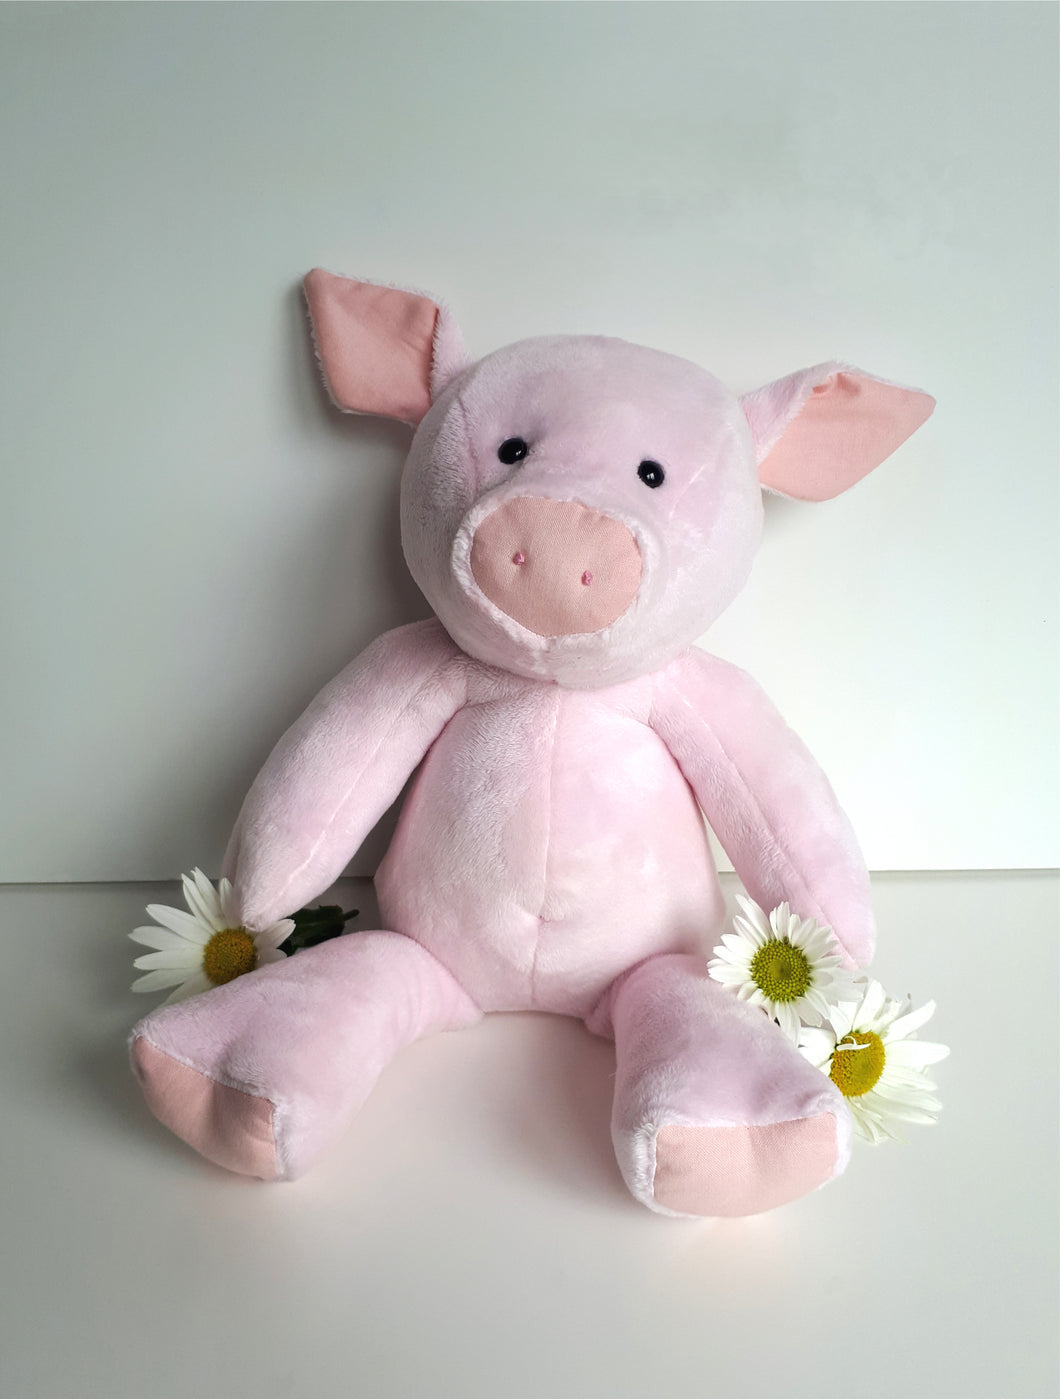 Handmade soft toy pig made with super soft Shannon cuddle solid fur fabric in baby pink.